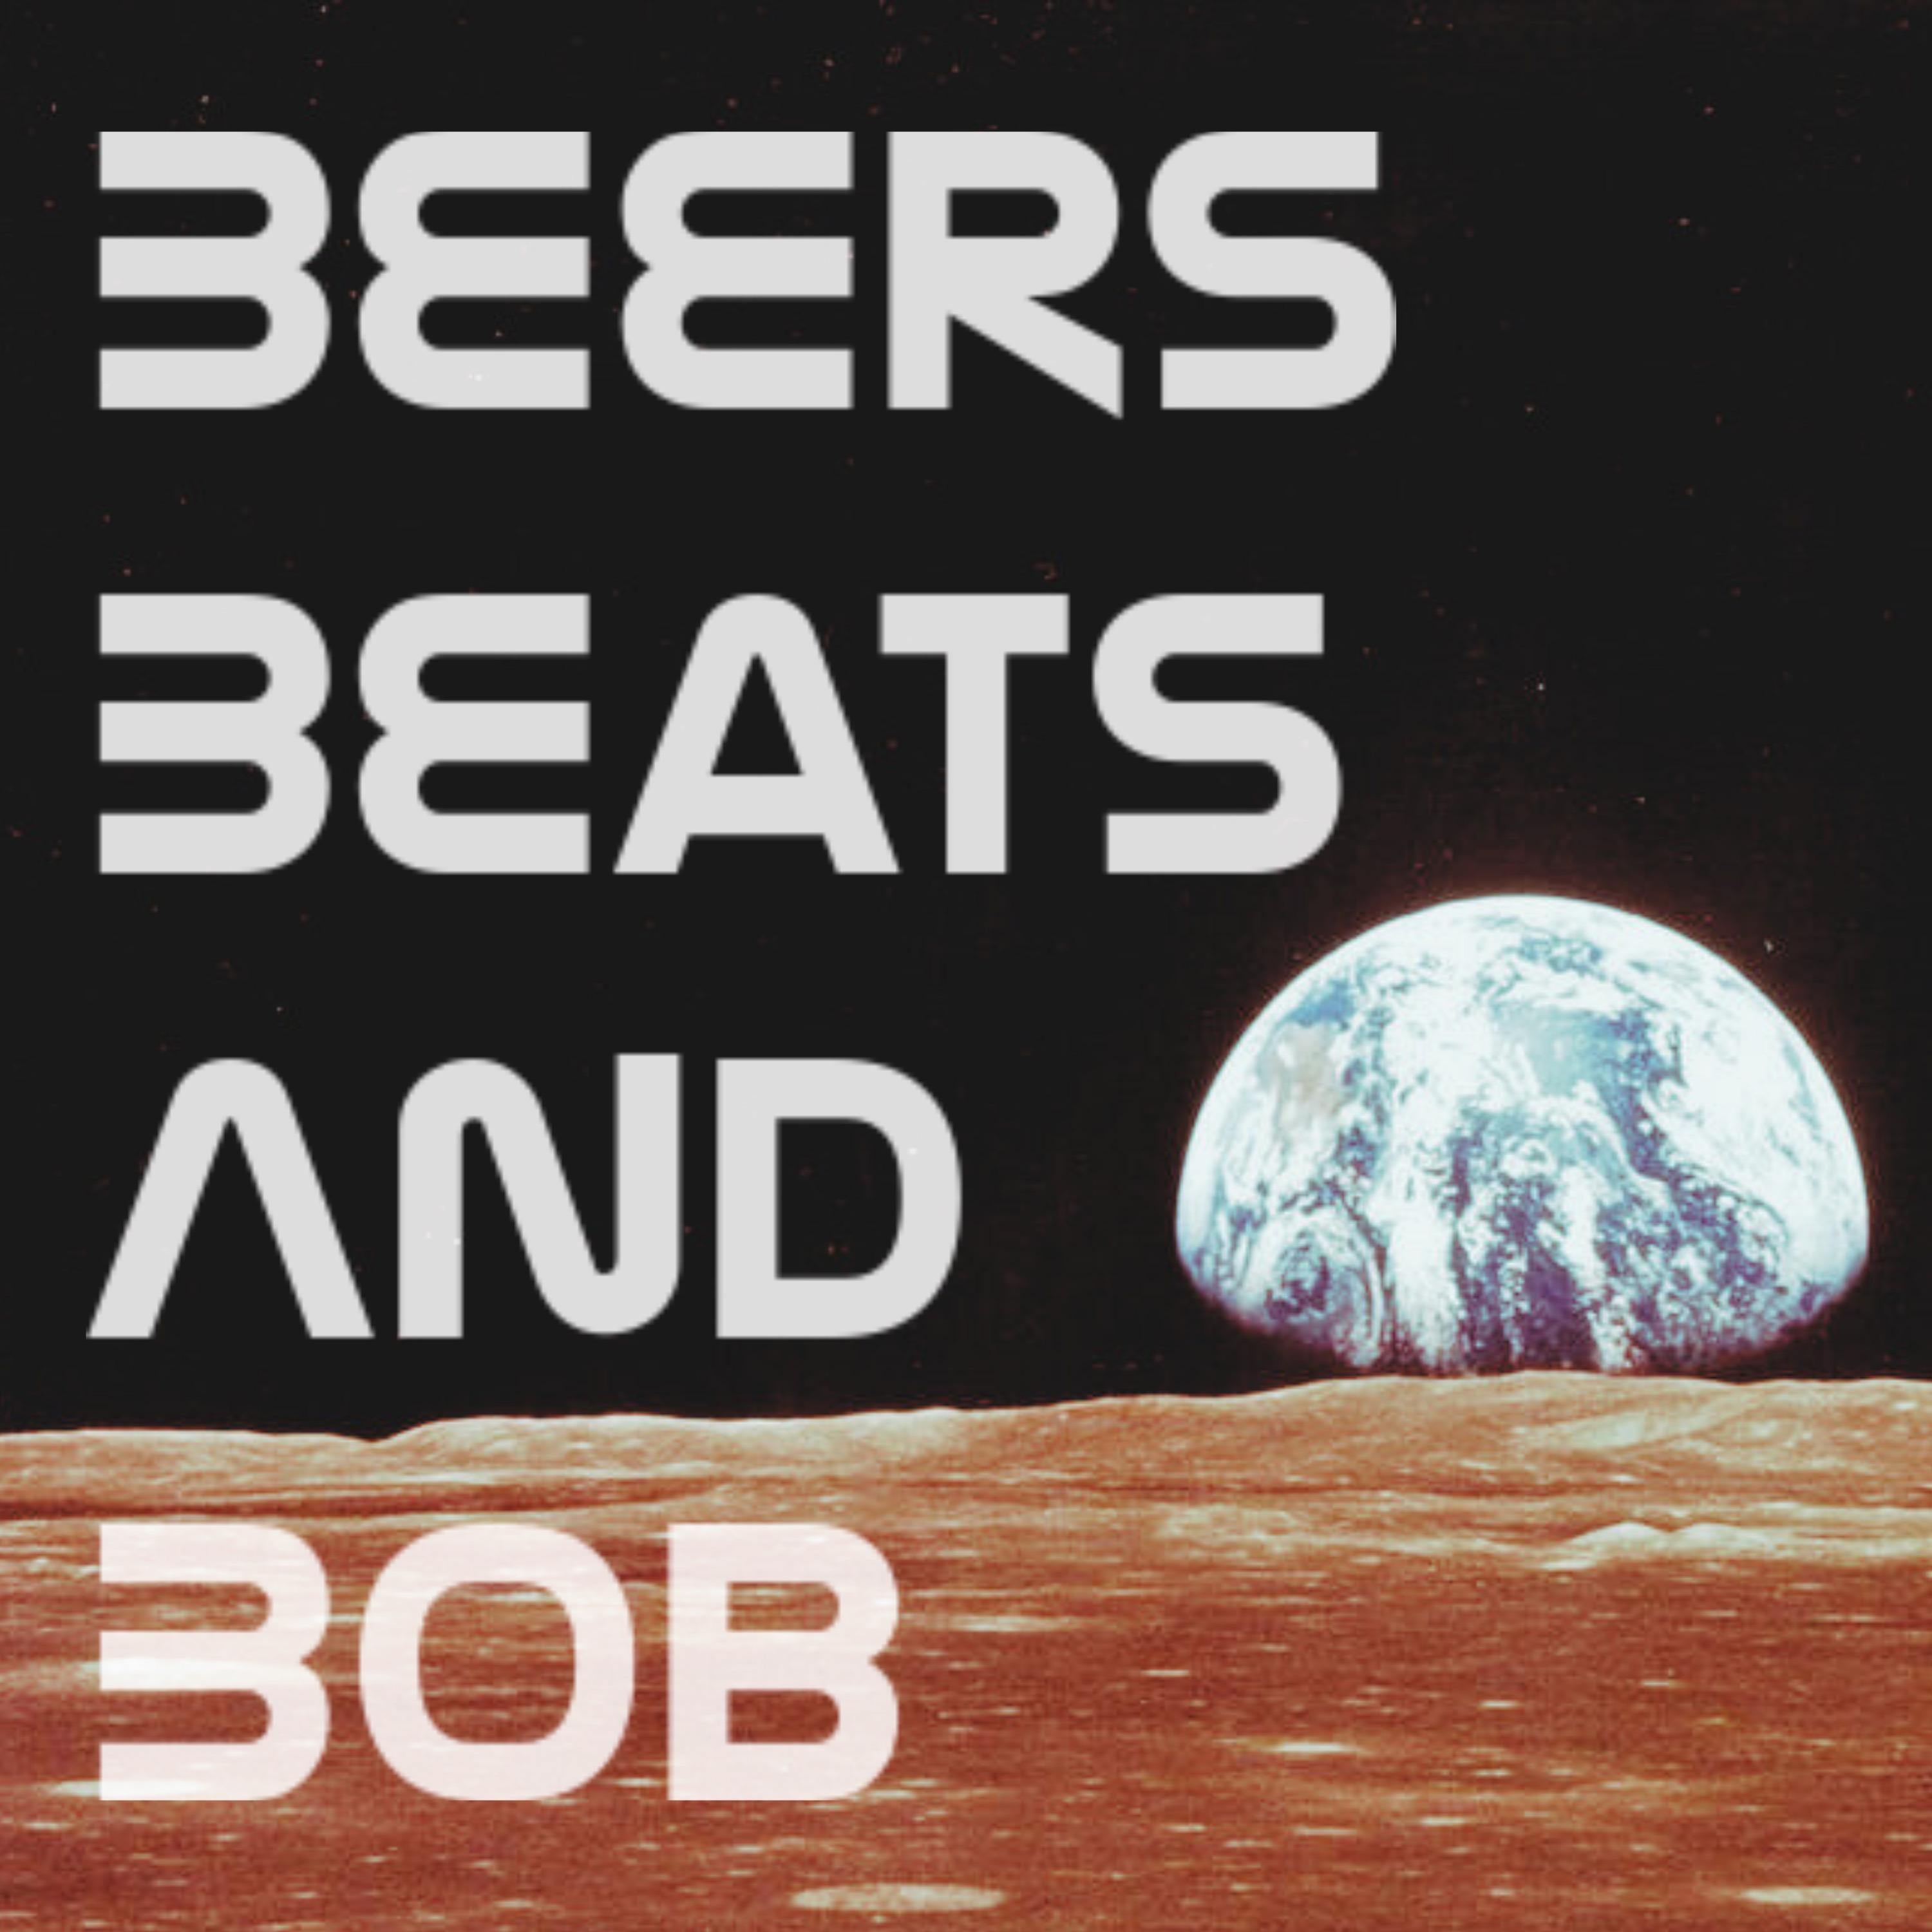 Beers Beats and Bob | A For All Mankind Podcast